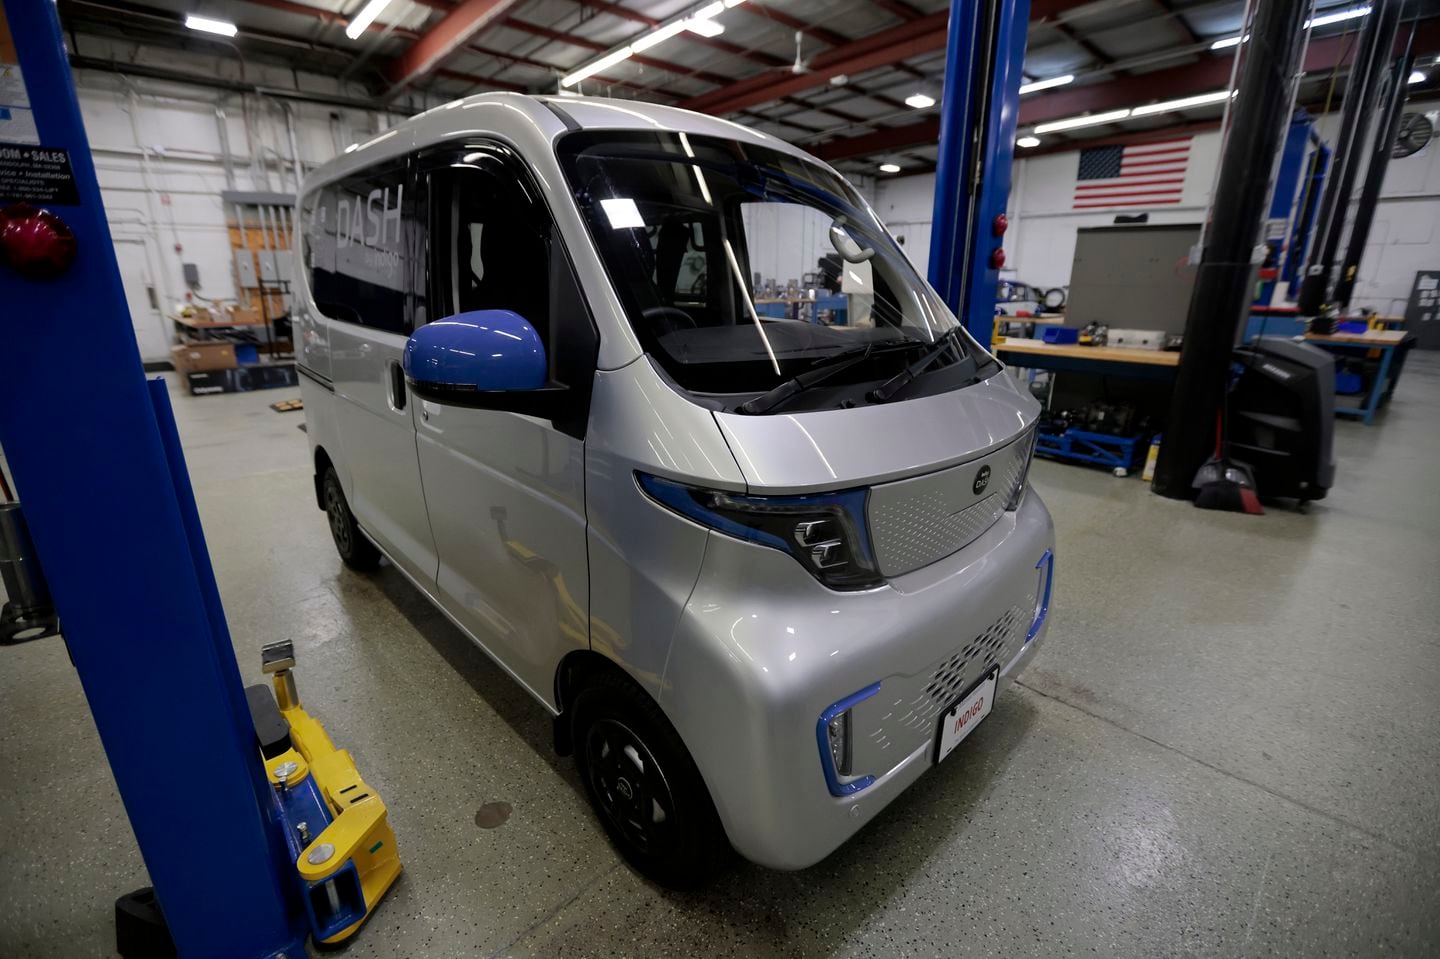 Indigo Technologies, a Woburn startup, designs electric delivery vans and other vehicles. The innovation was developed at MIT and puts motors inside the vehicles’ wheels to save space and lower battery costs.